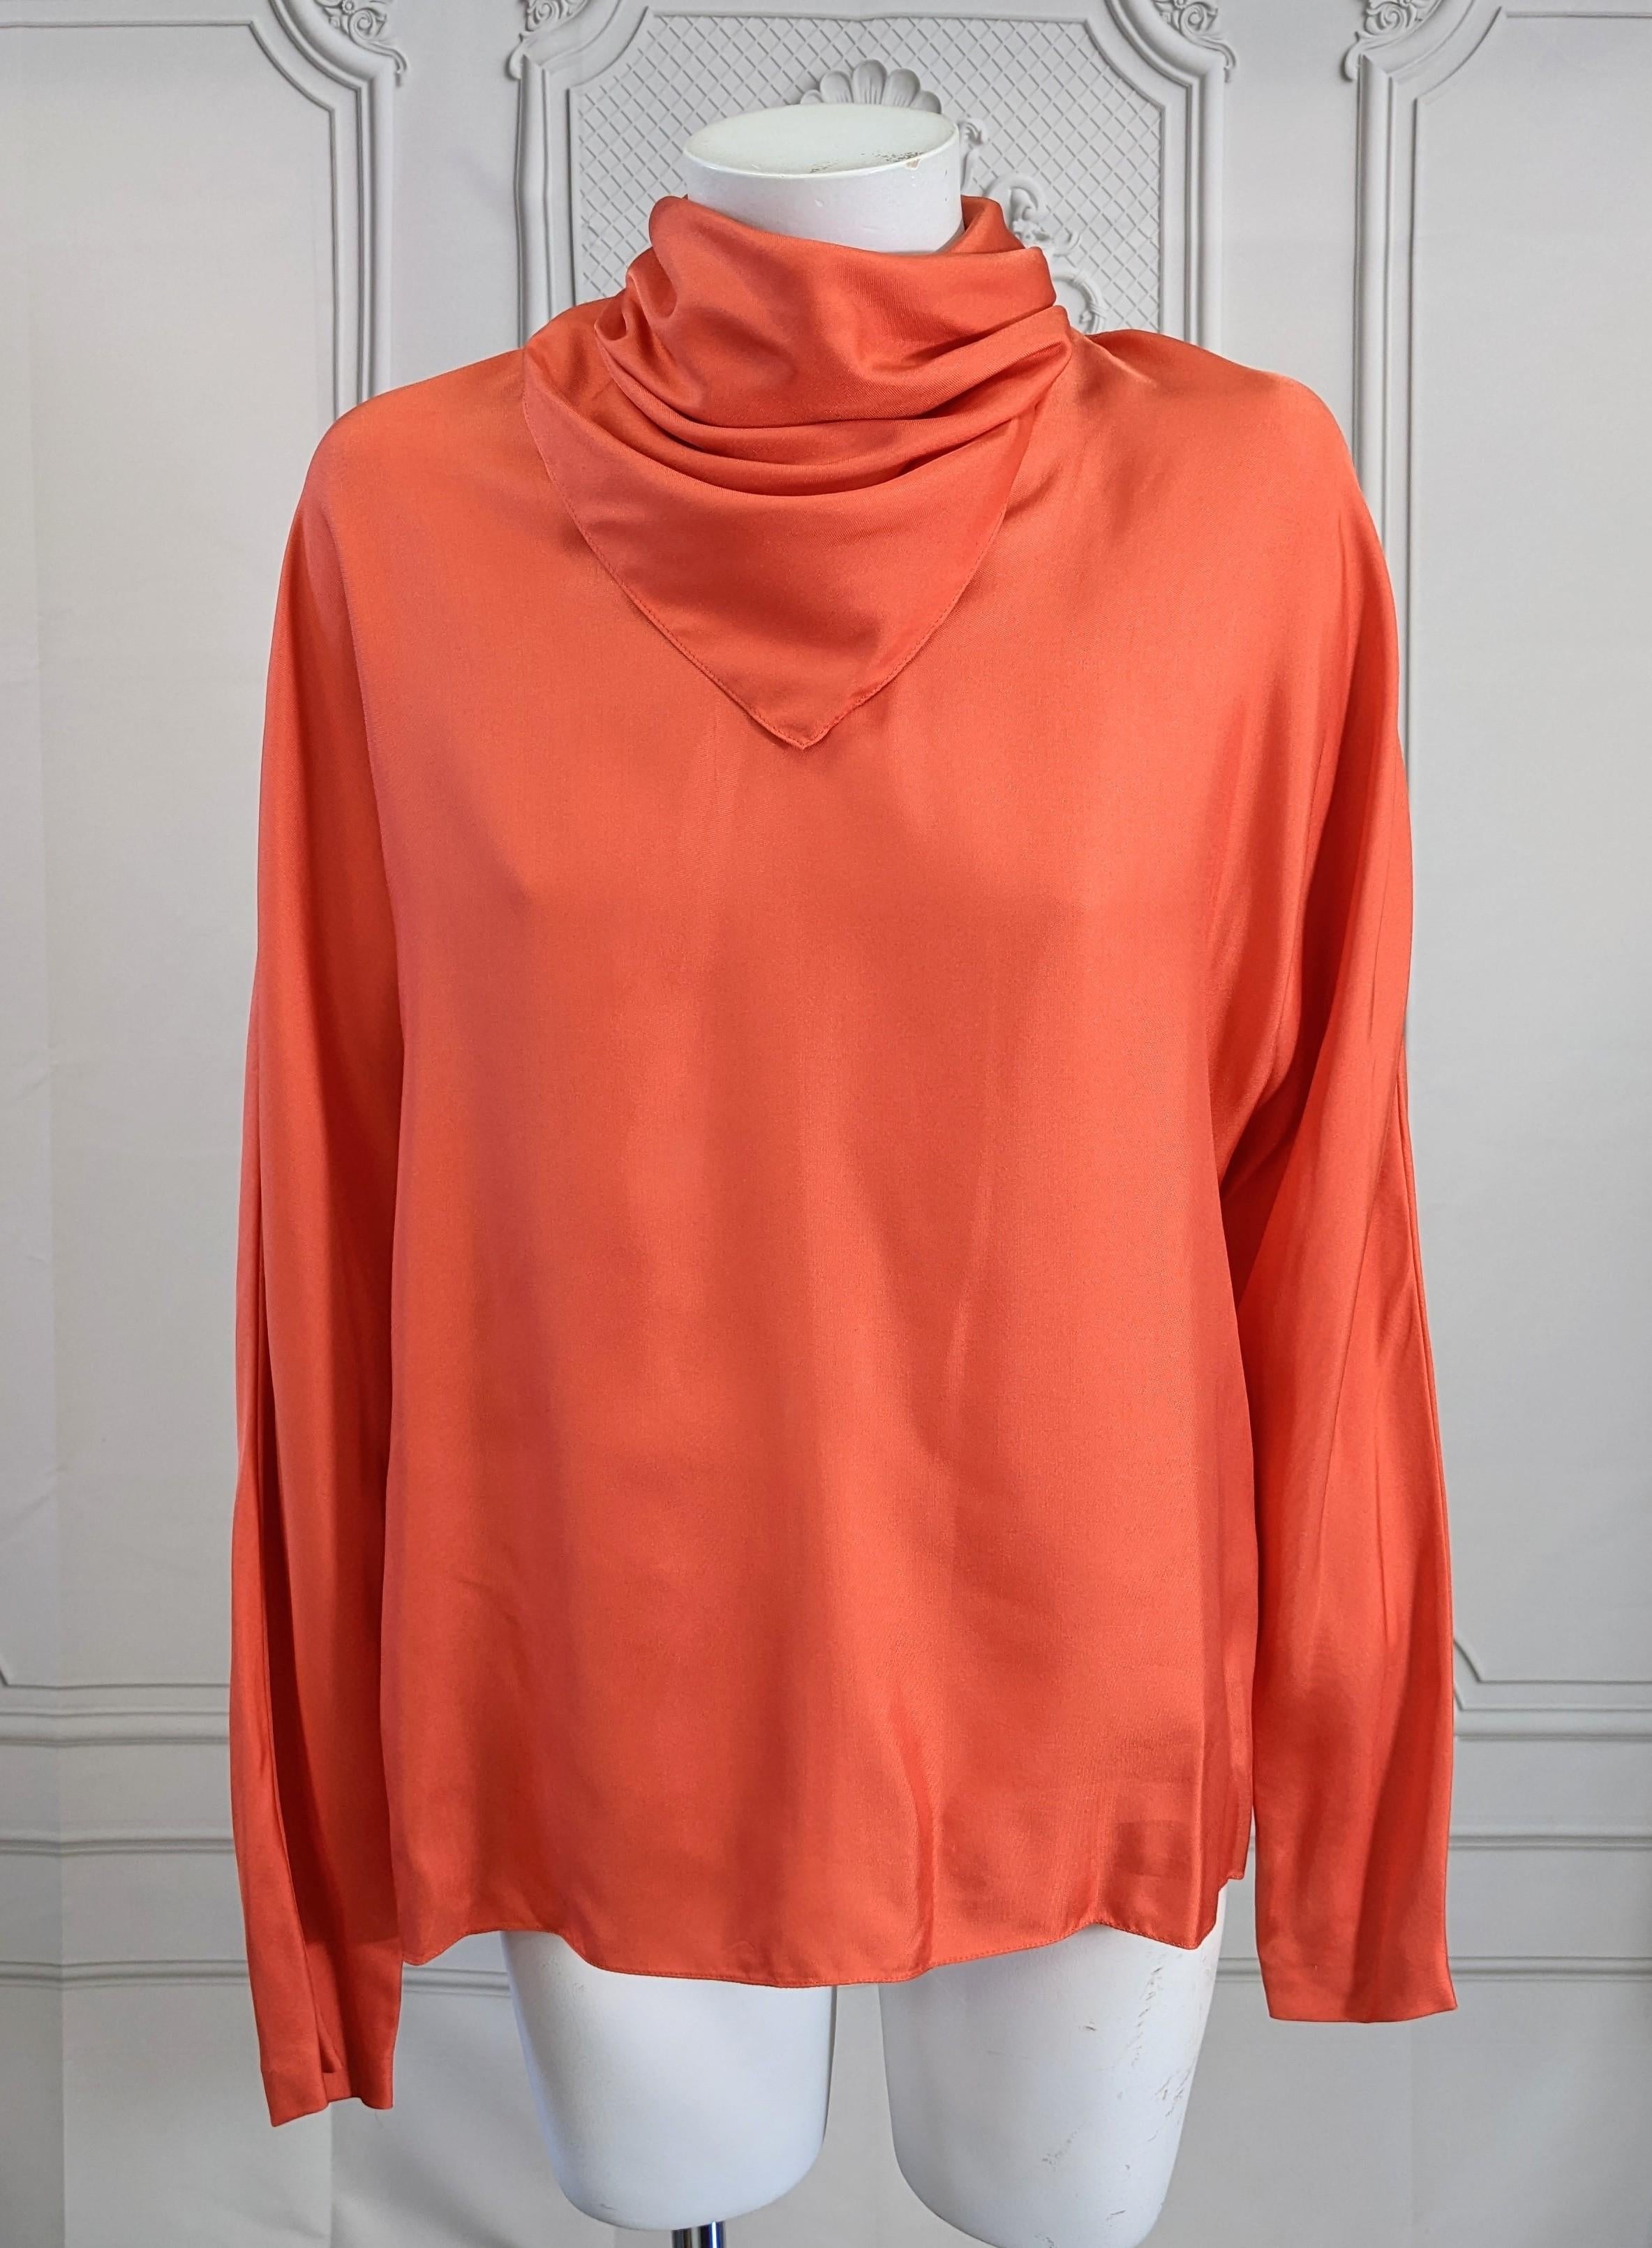 Stephen Sprouse Orange Silk Twill Blouse with attached scarf neckline made for one of his iconic monochromatic rocker suiting looks. Soft silk twill with high dolman cut sleeves and doubled draped scarf neckline which knots and buttons on the back.